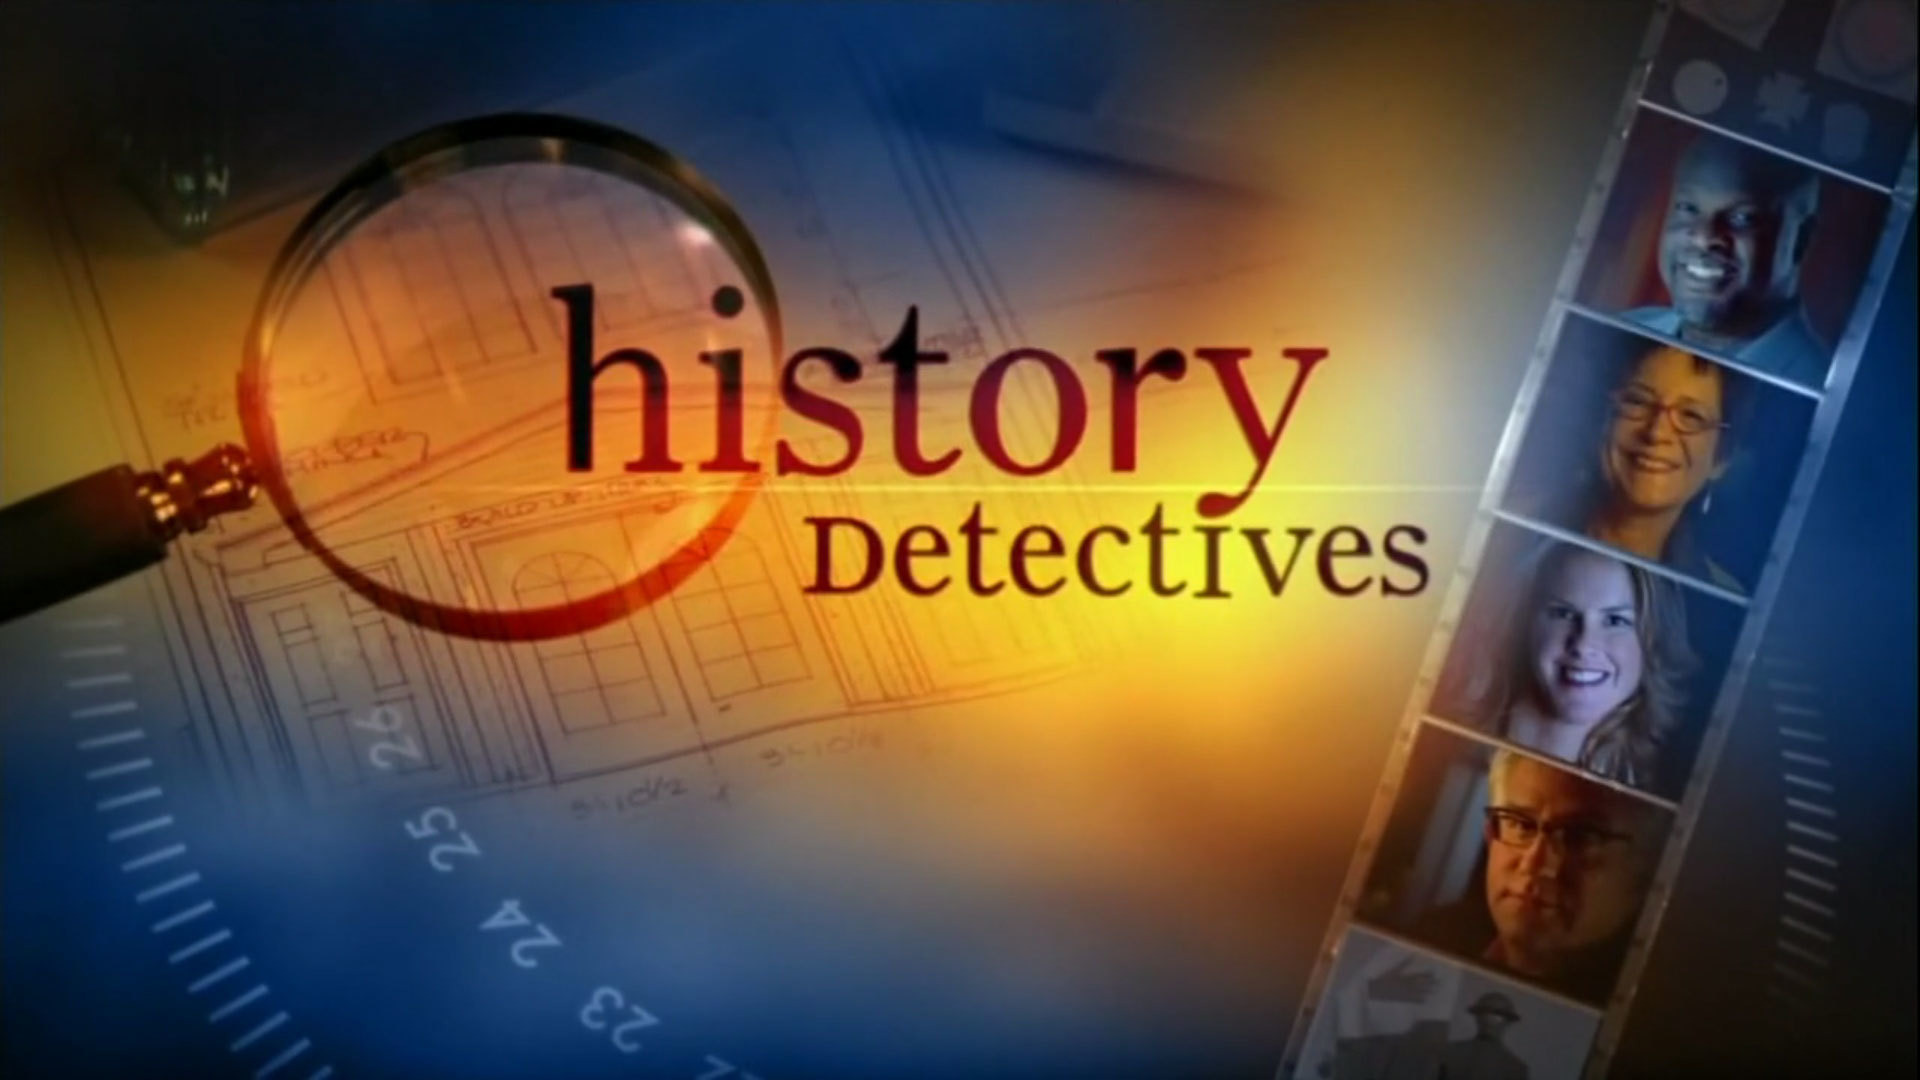 Show History Detectives